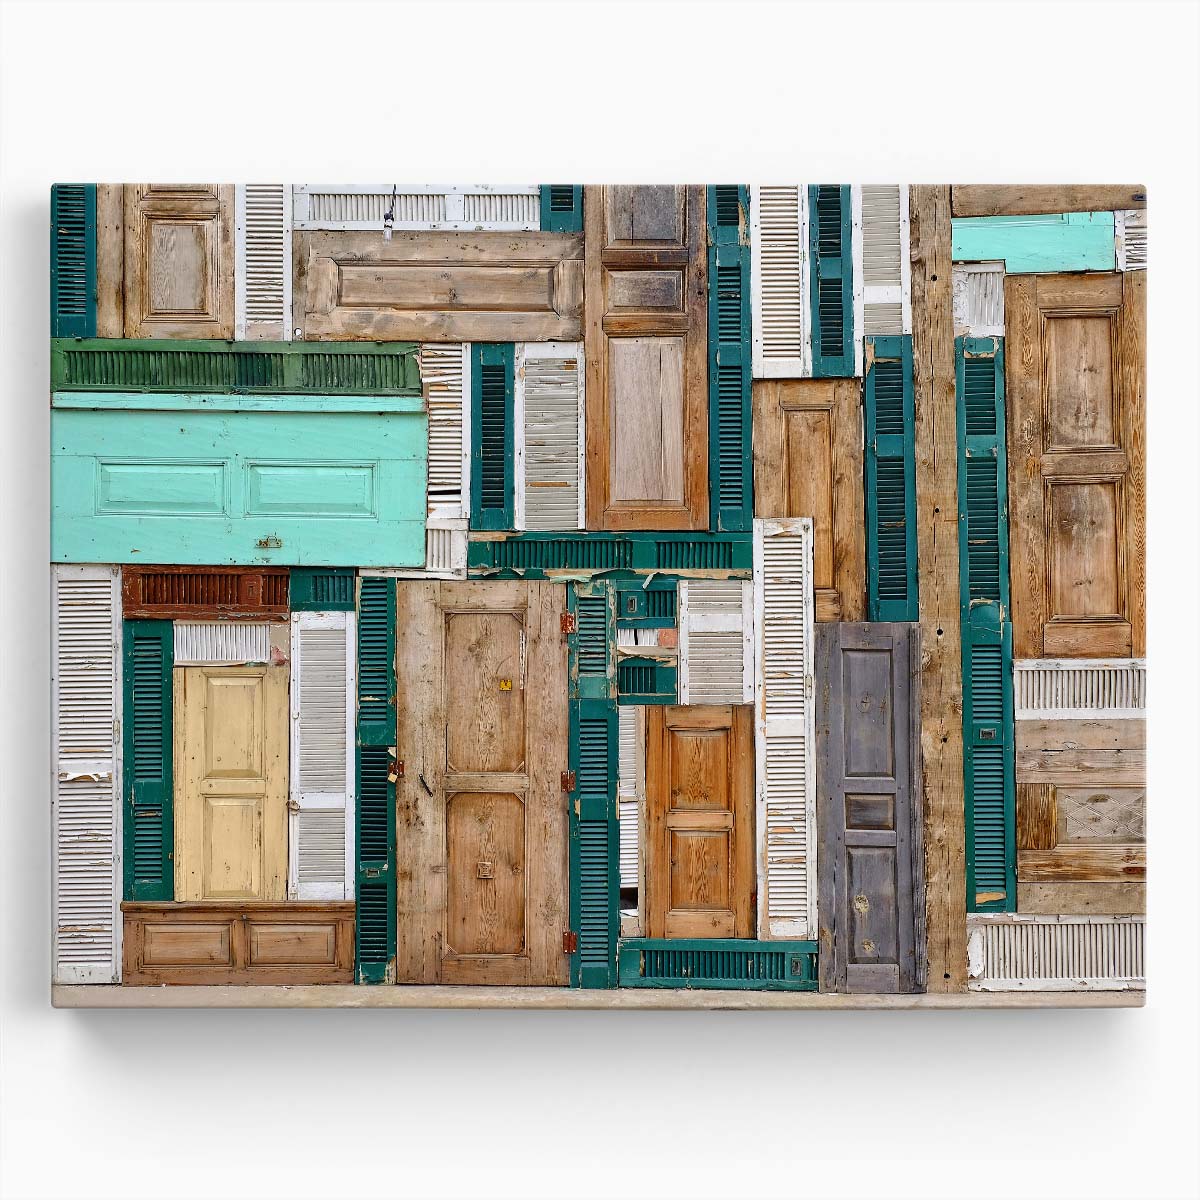 Abstract Doors & Urban Architecture Wall Art by Luxuriance Designs. Made in USA.